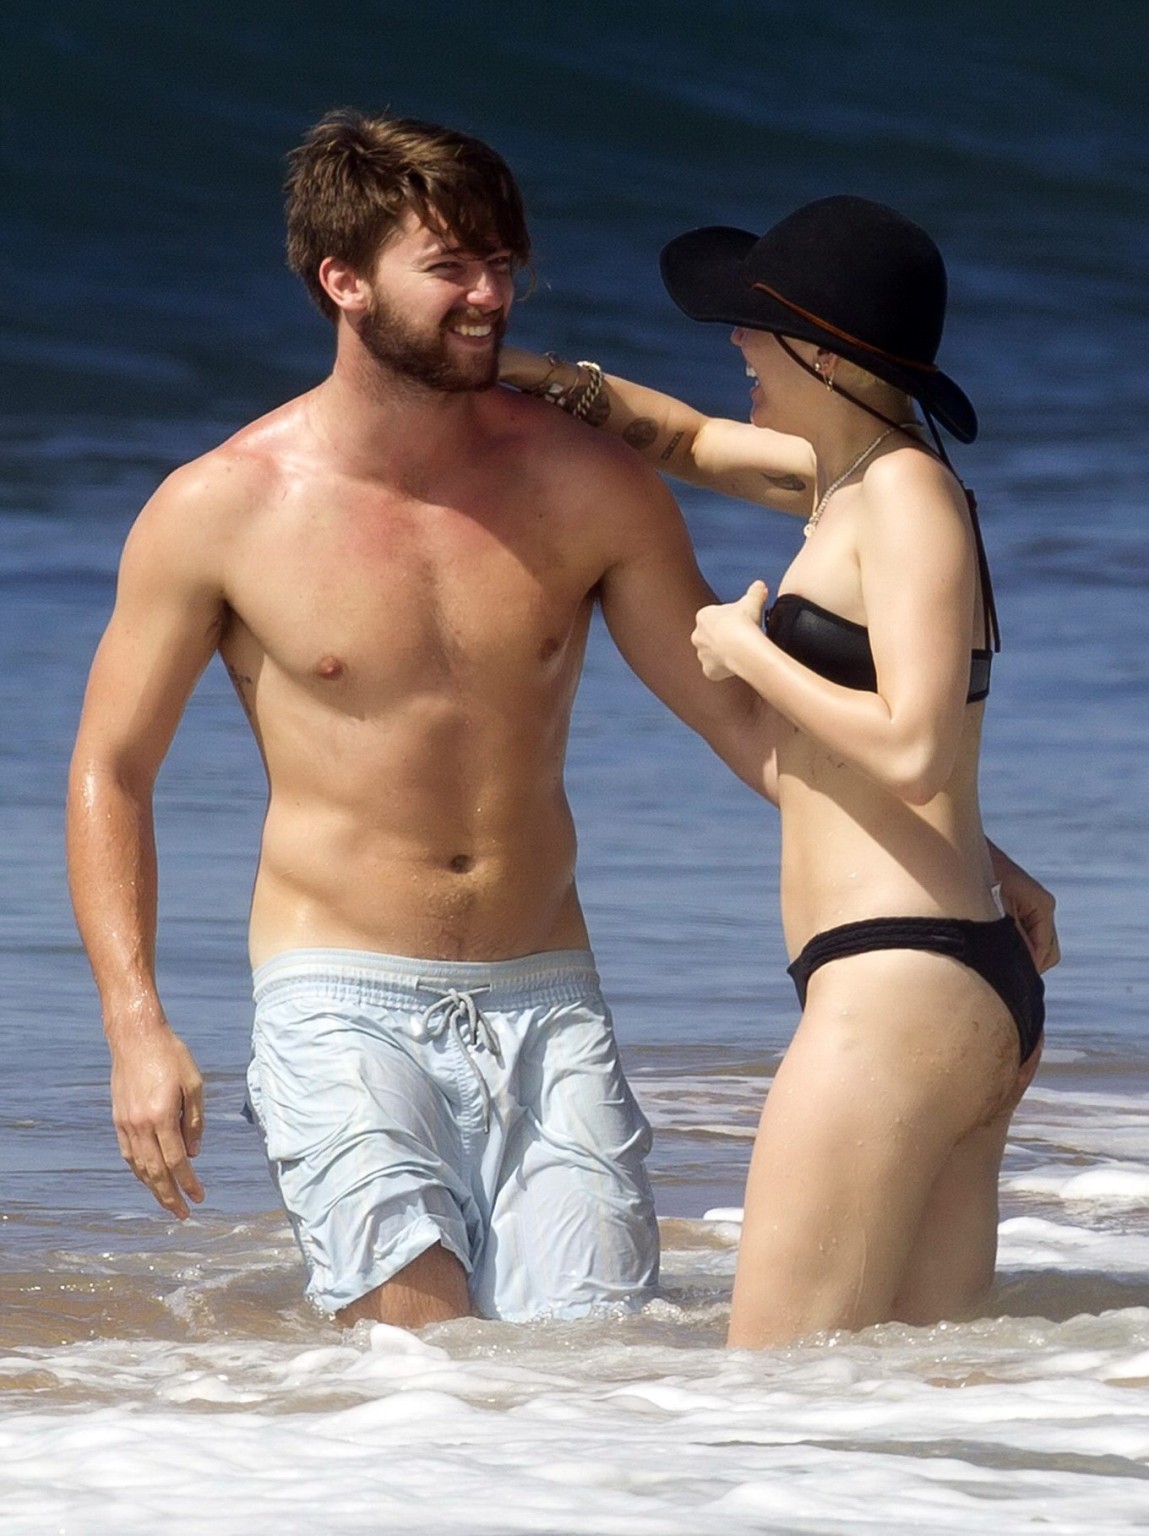 Miley Cyrus Showing Off Her Bikini Body And Getting Her Ass Groped On A